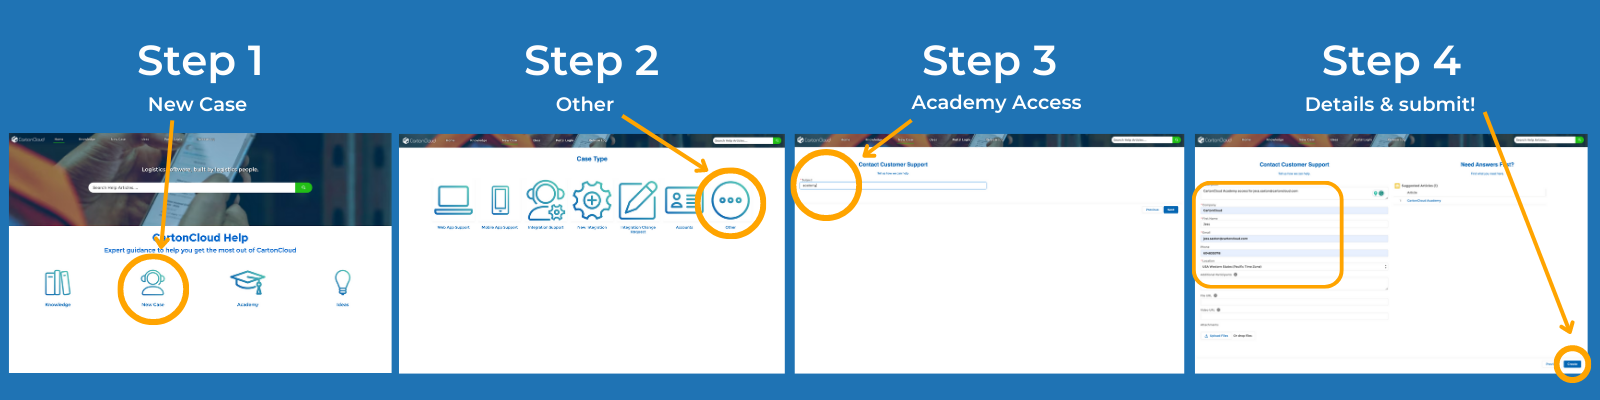 Step by Step guide for the CartonCloud Academy